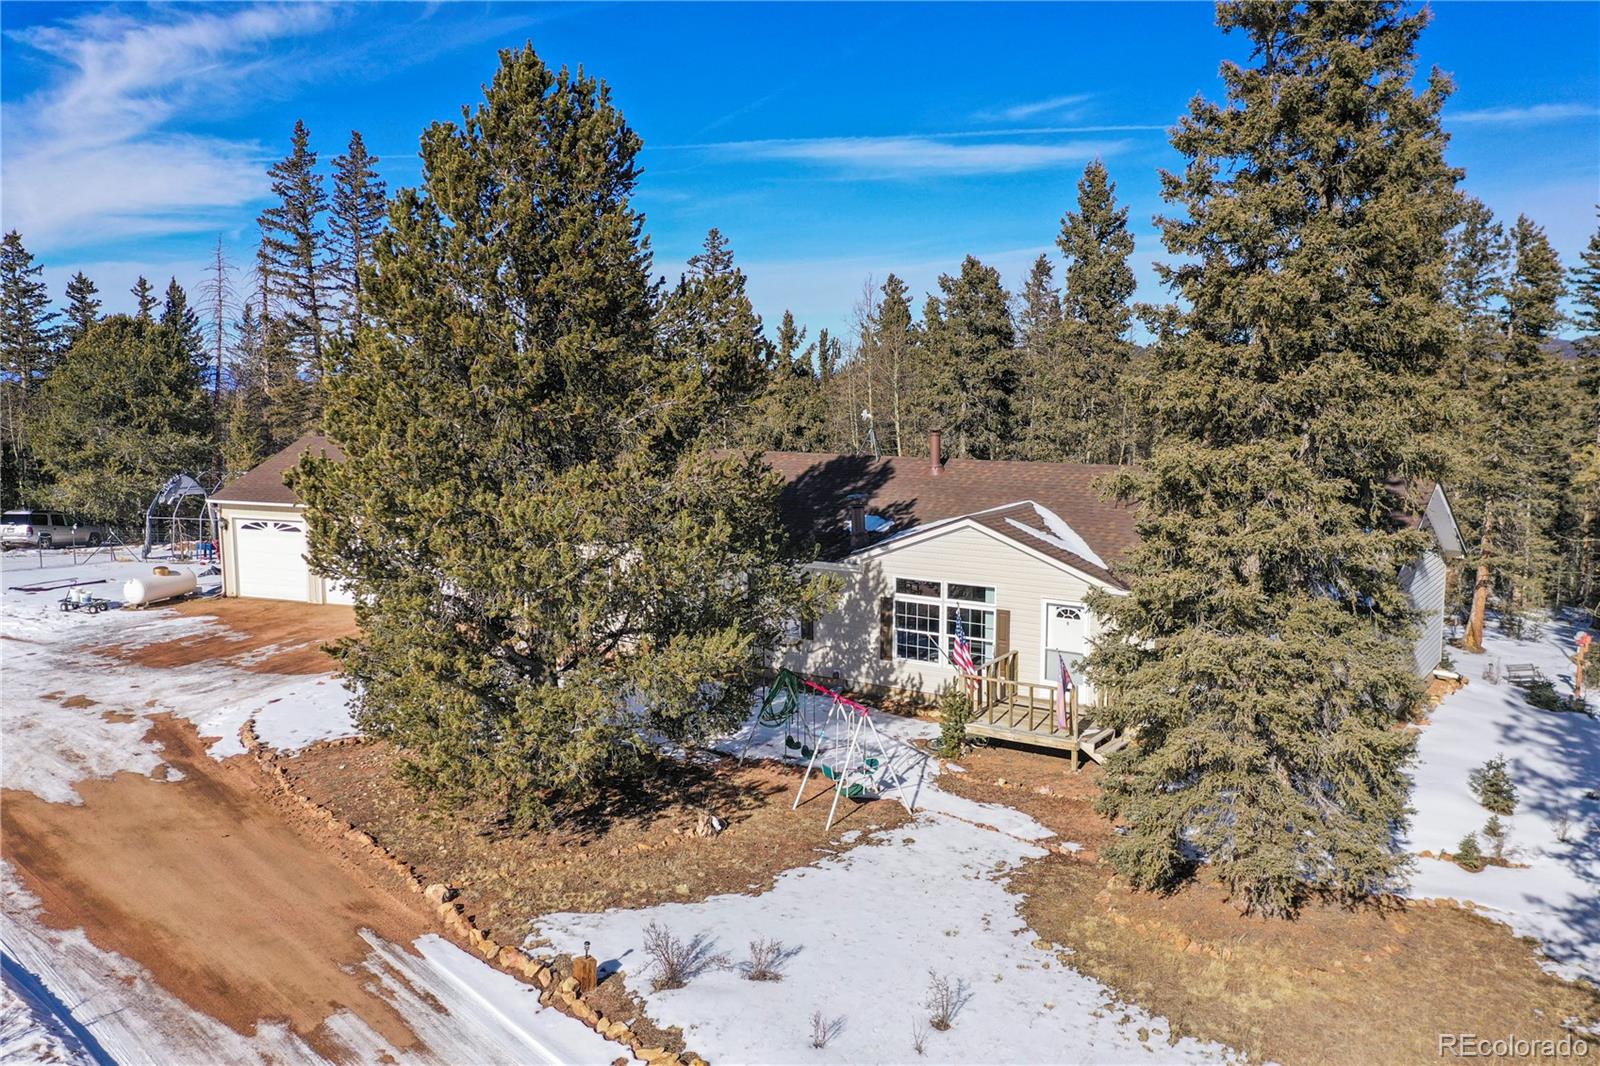 681  county road 61 , cripple creek sold home. Closed on 2024-03-28 for $420,000.